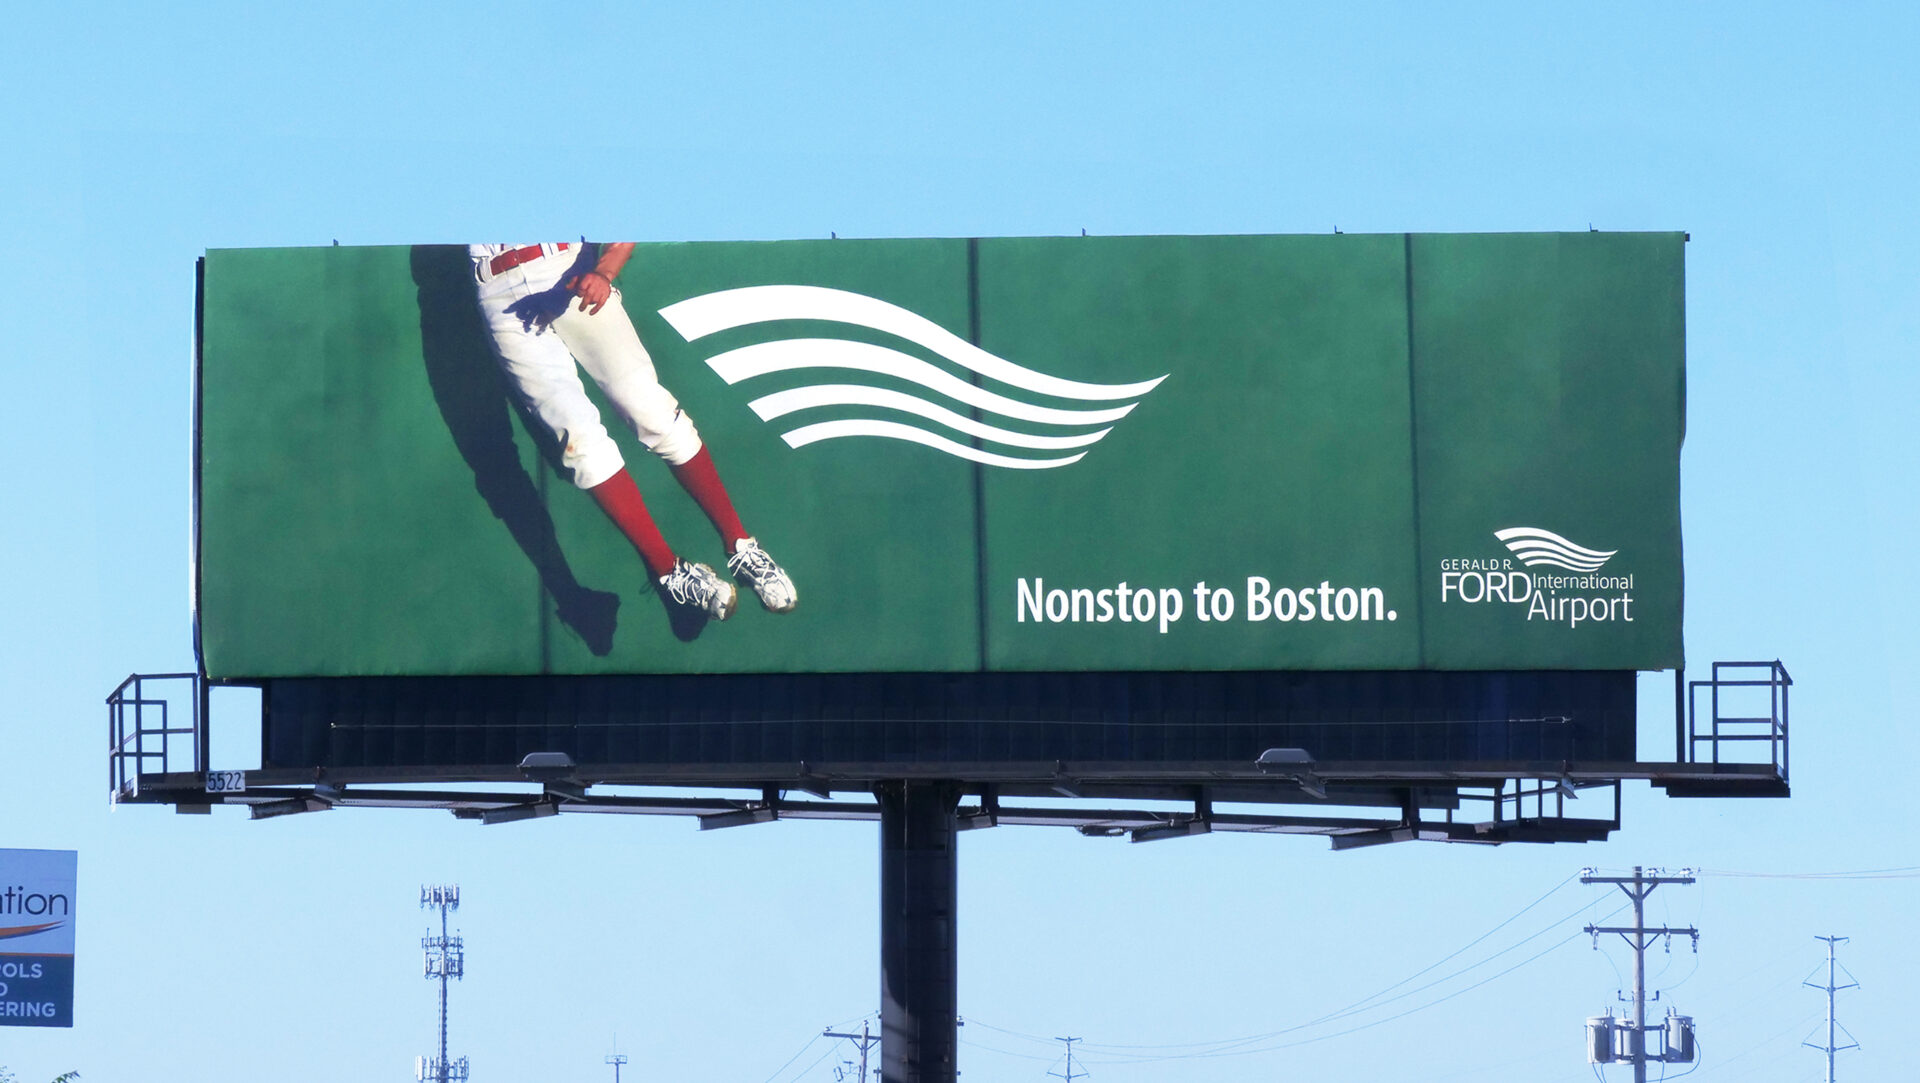 Out of home brand campaign for Gerald R. Ford International Airport. Nonstop to Boston